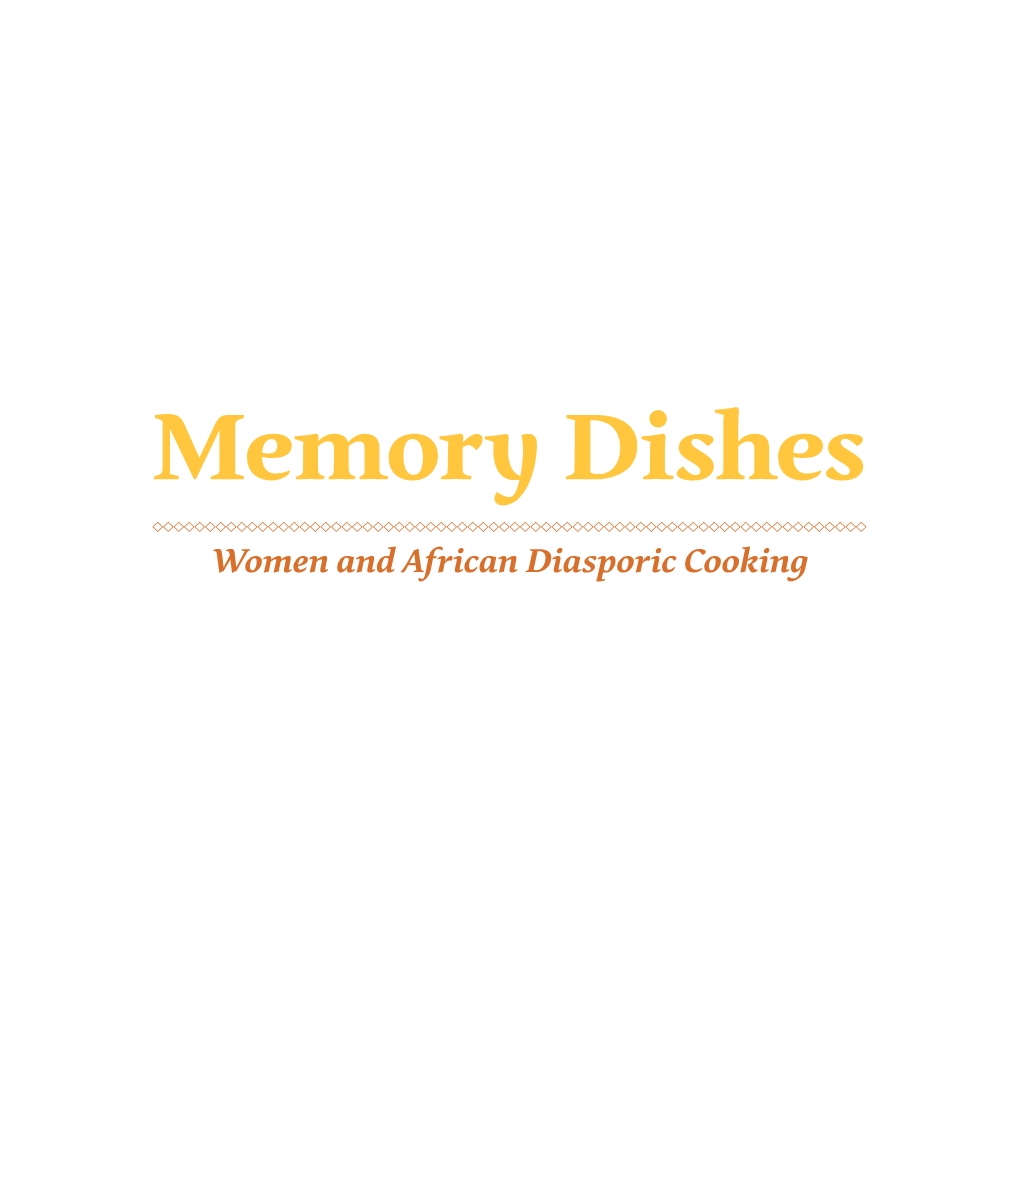 Memory Dishes Women and African Diasporic Cooking the Cooking Universe of the African Diaspora Letter from the Director